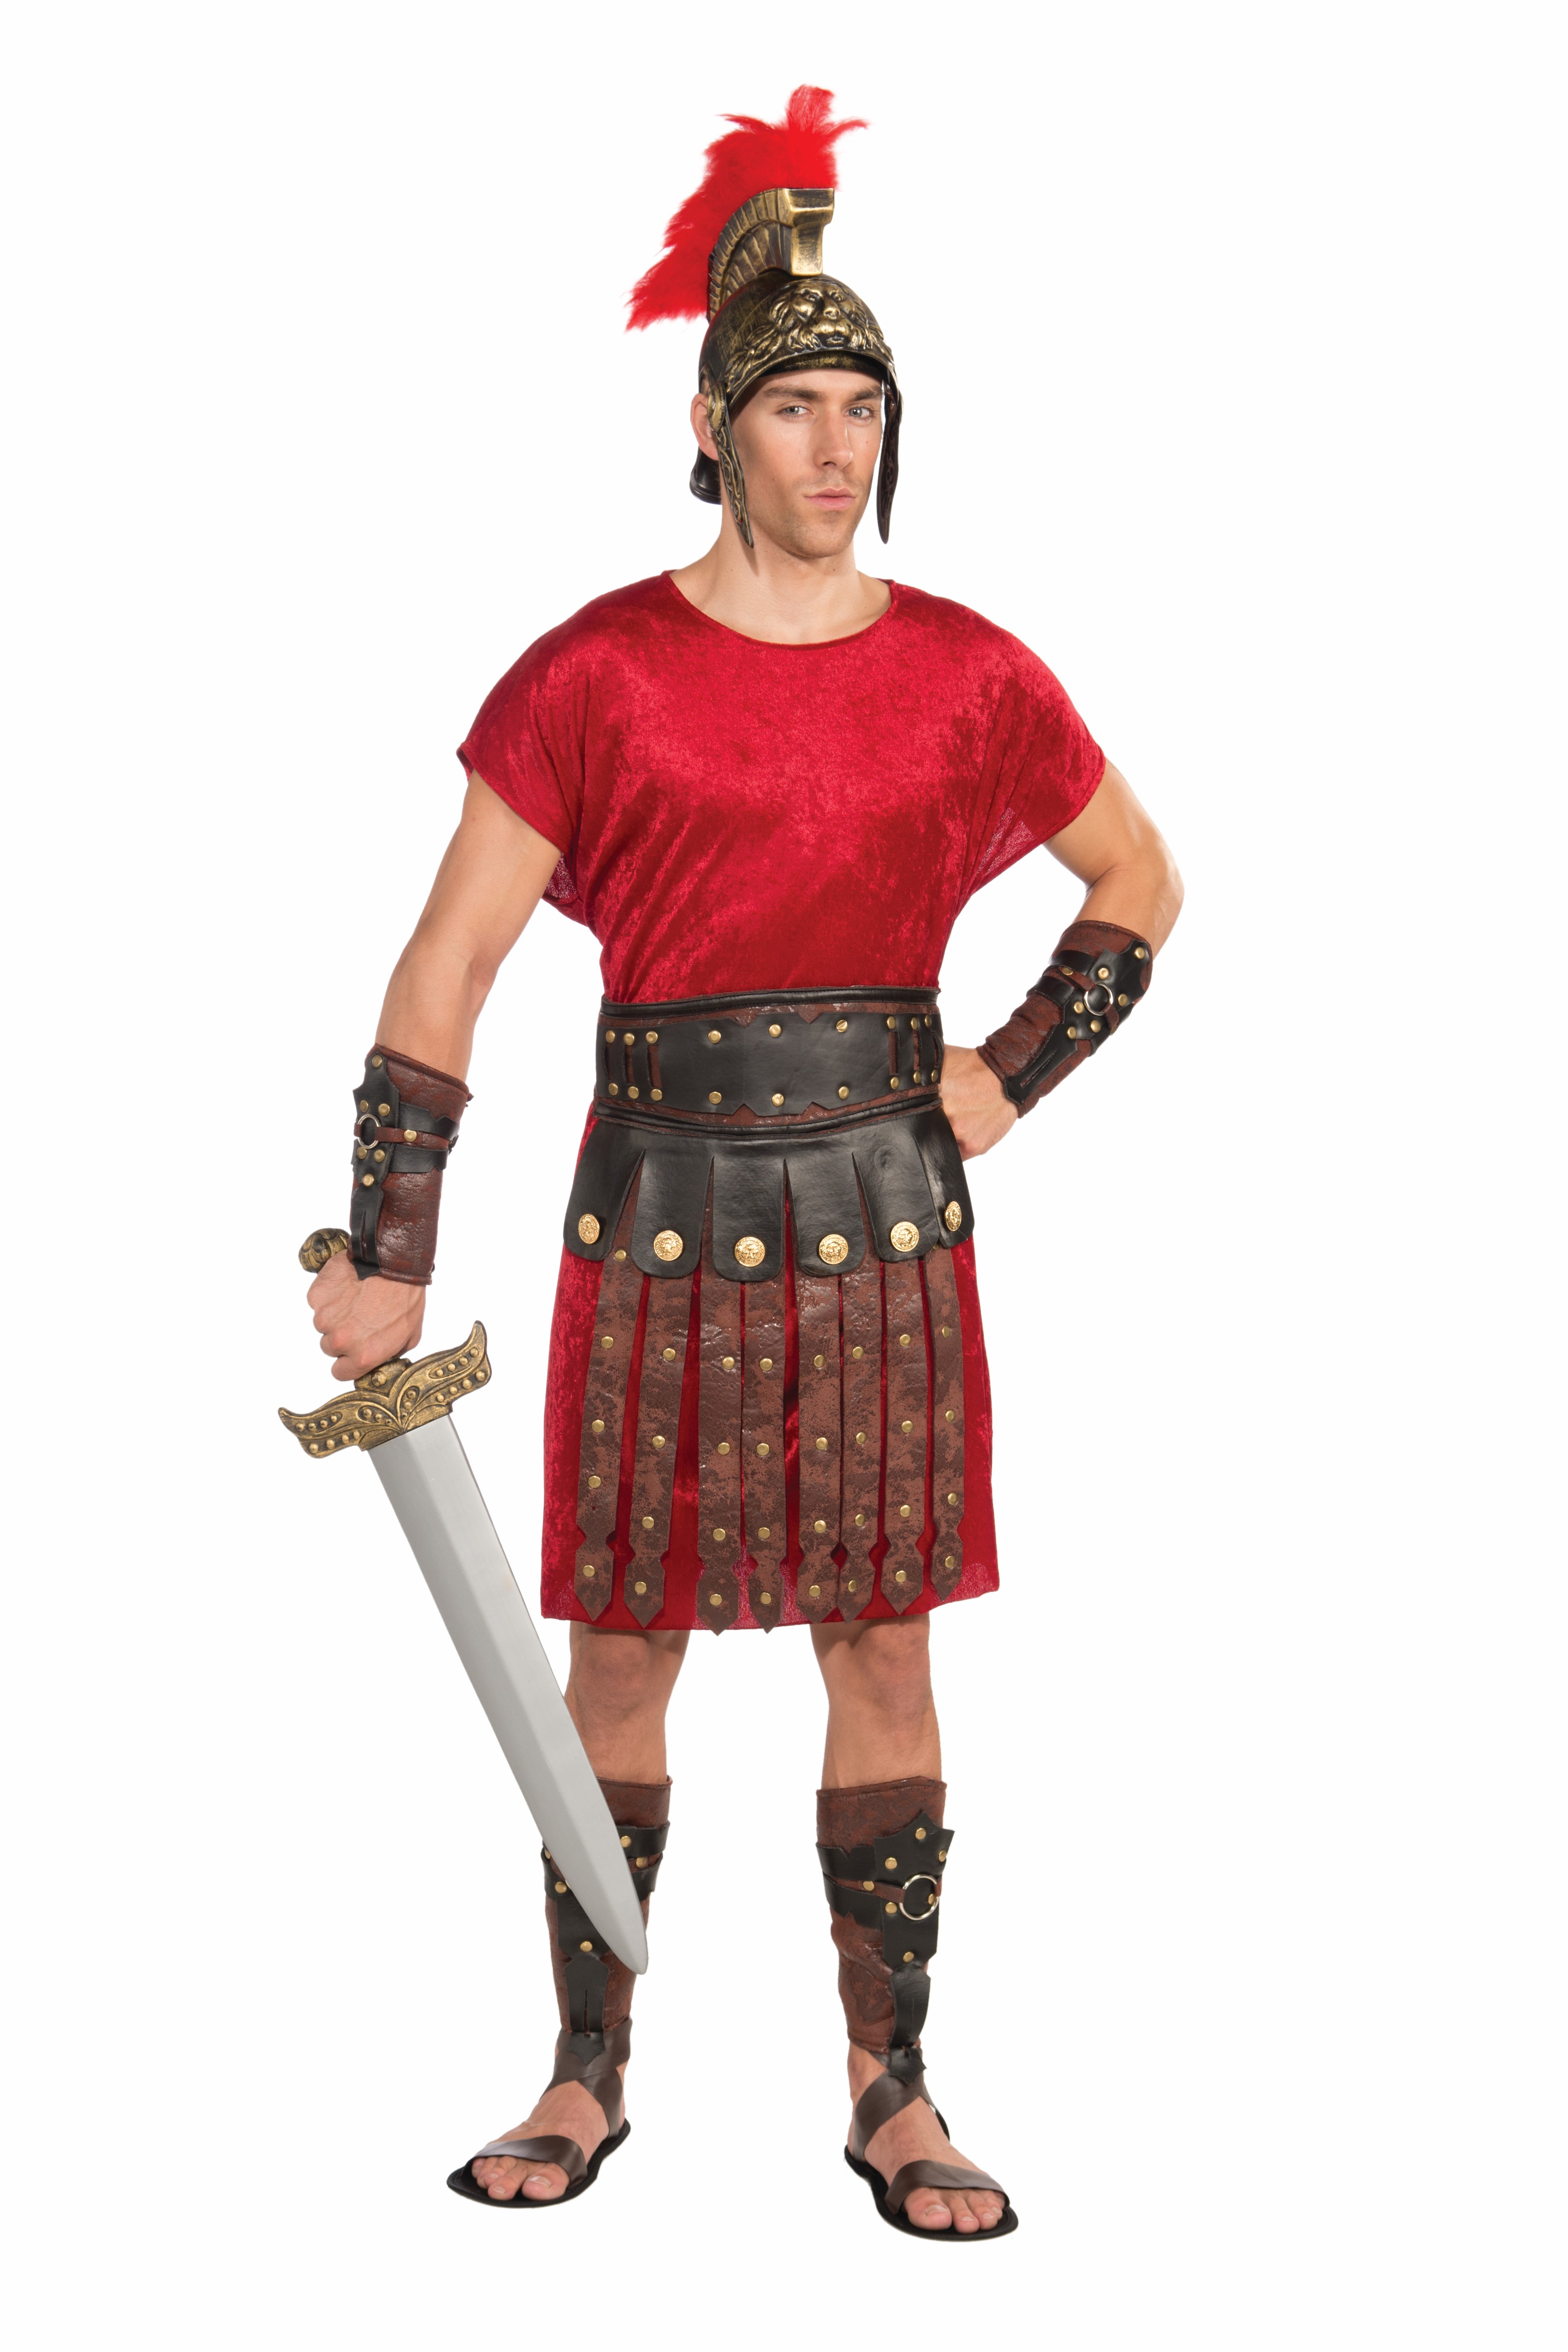 Details about   Medieval Muscles Armor Roman Greek HALLOWEEN Costume With Leather Apron Belt 